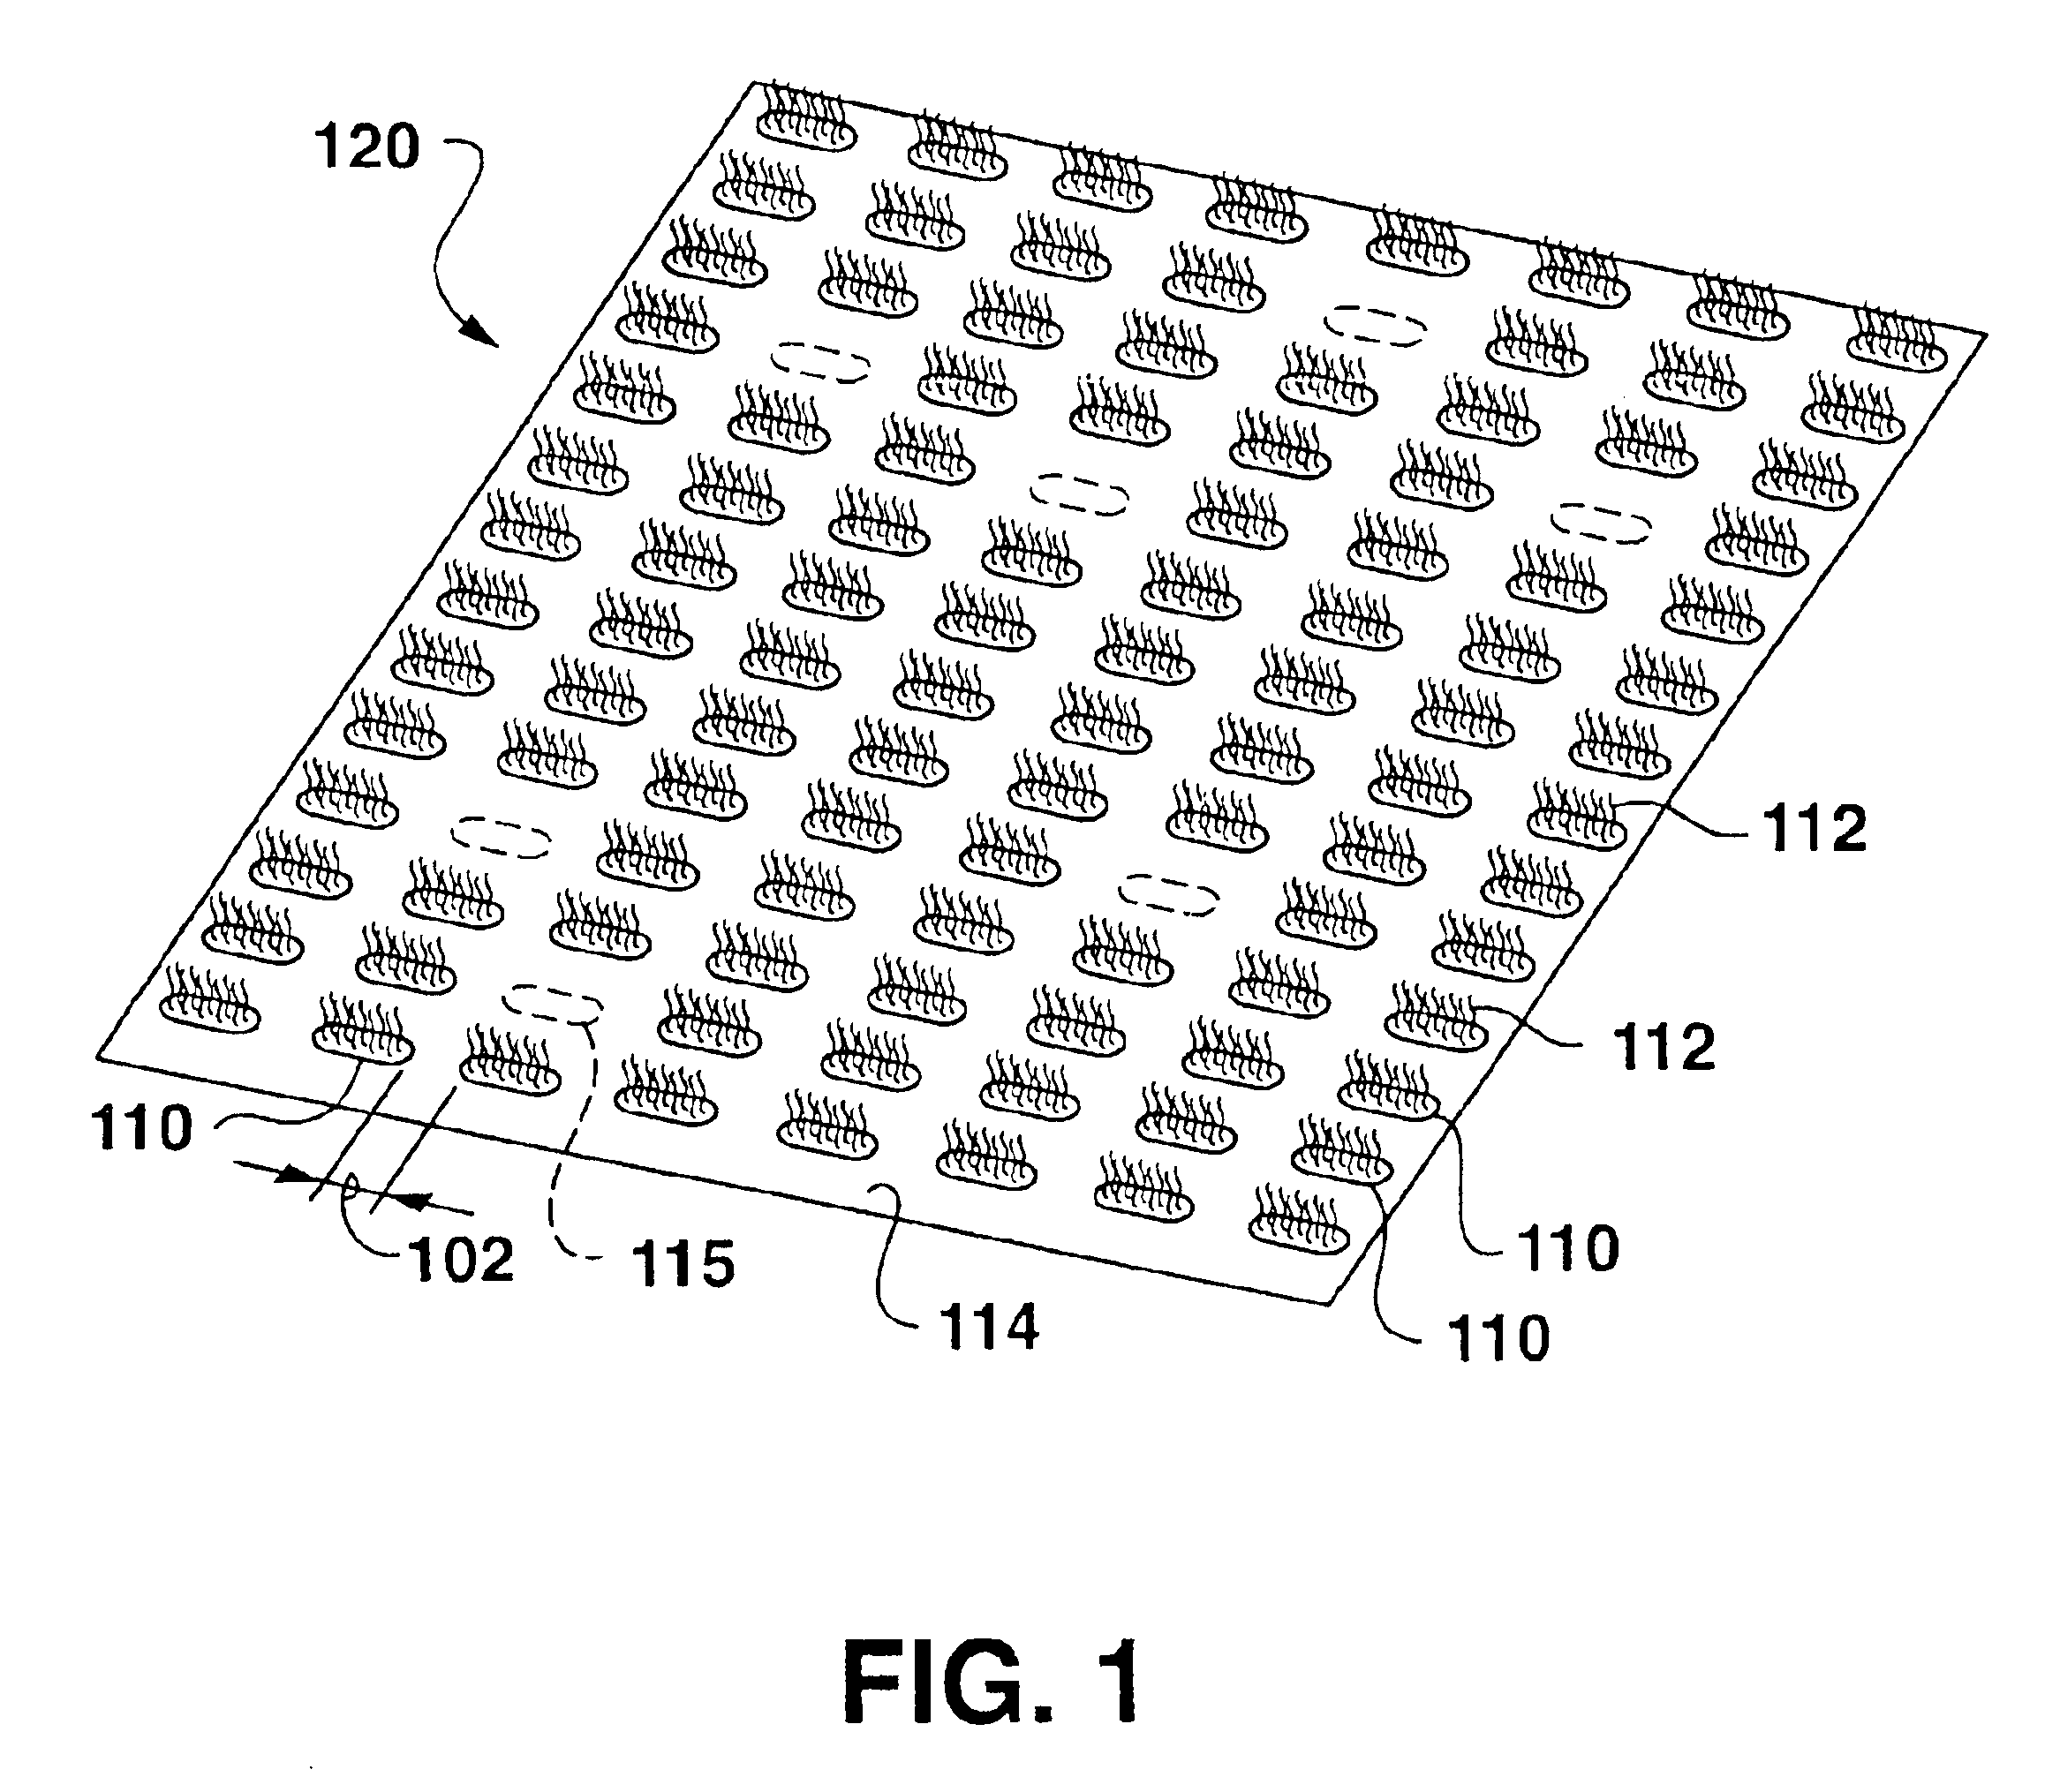 DNA-based memory device and method of reading and writing same